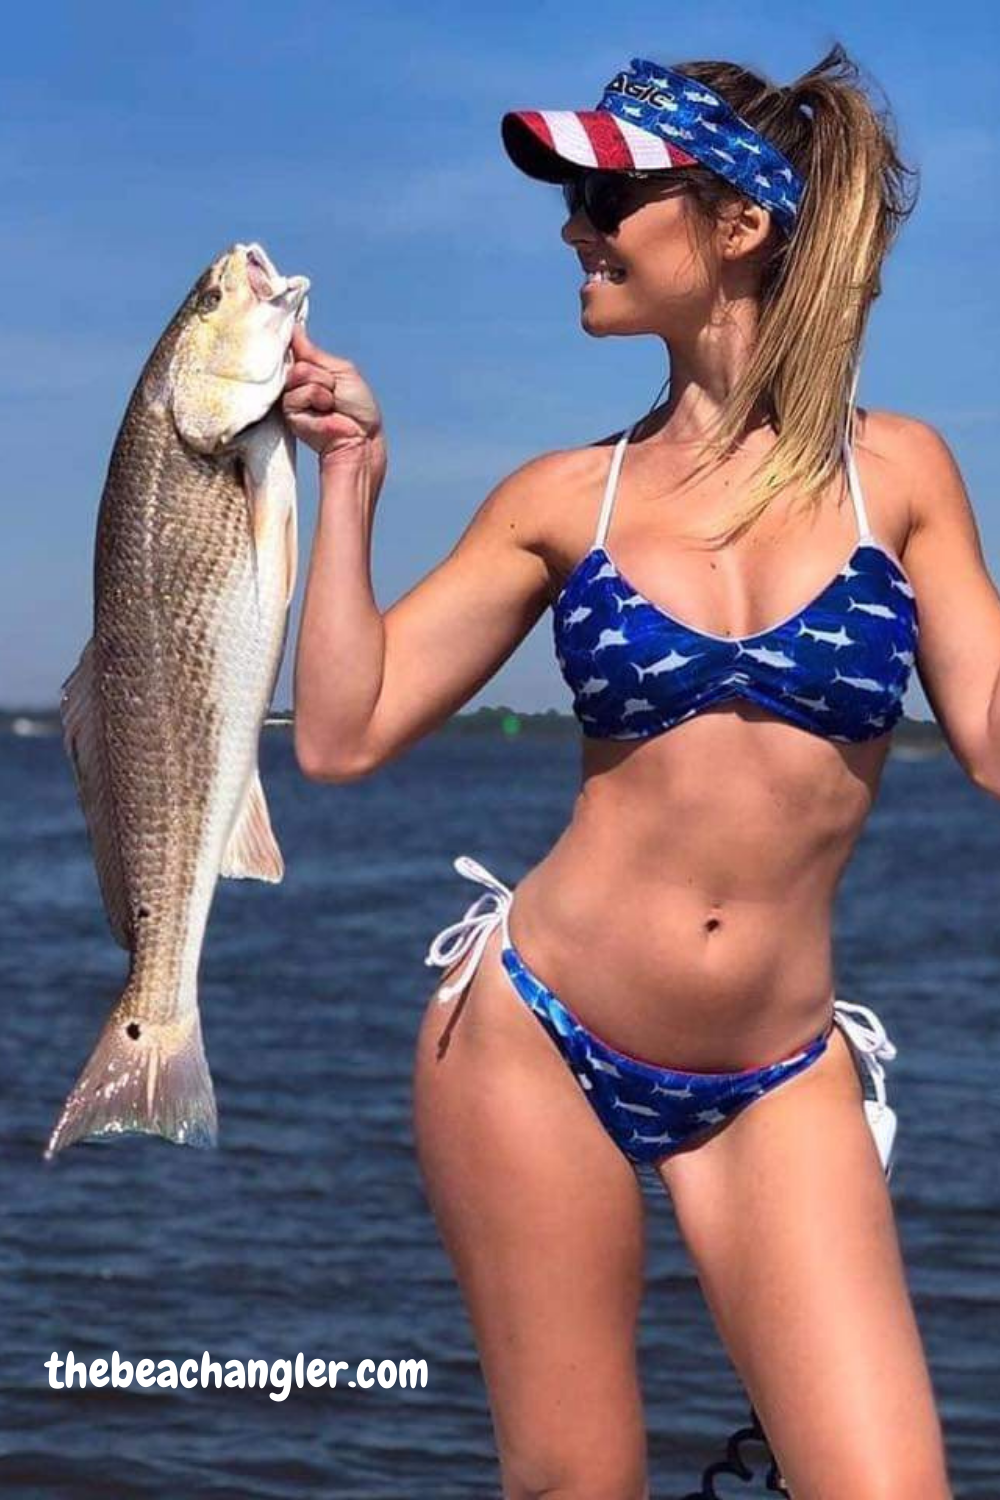 Lady with a nice texas redfish